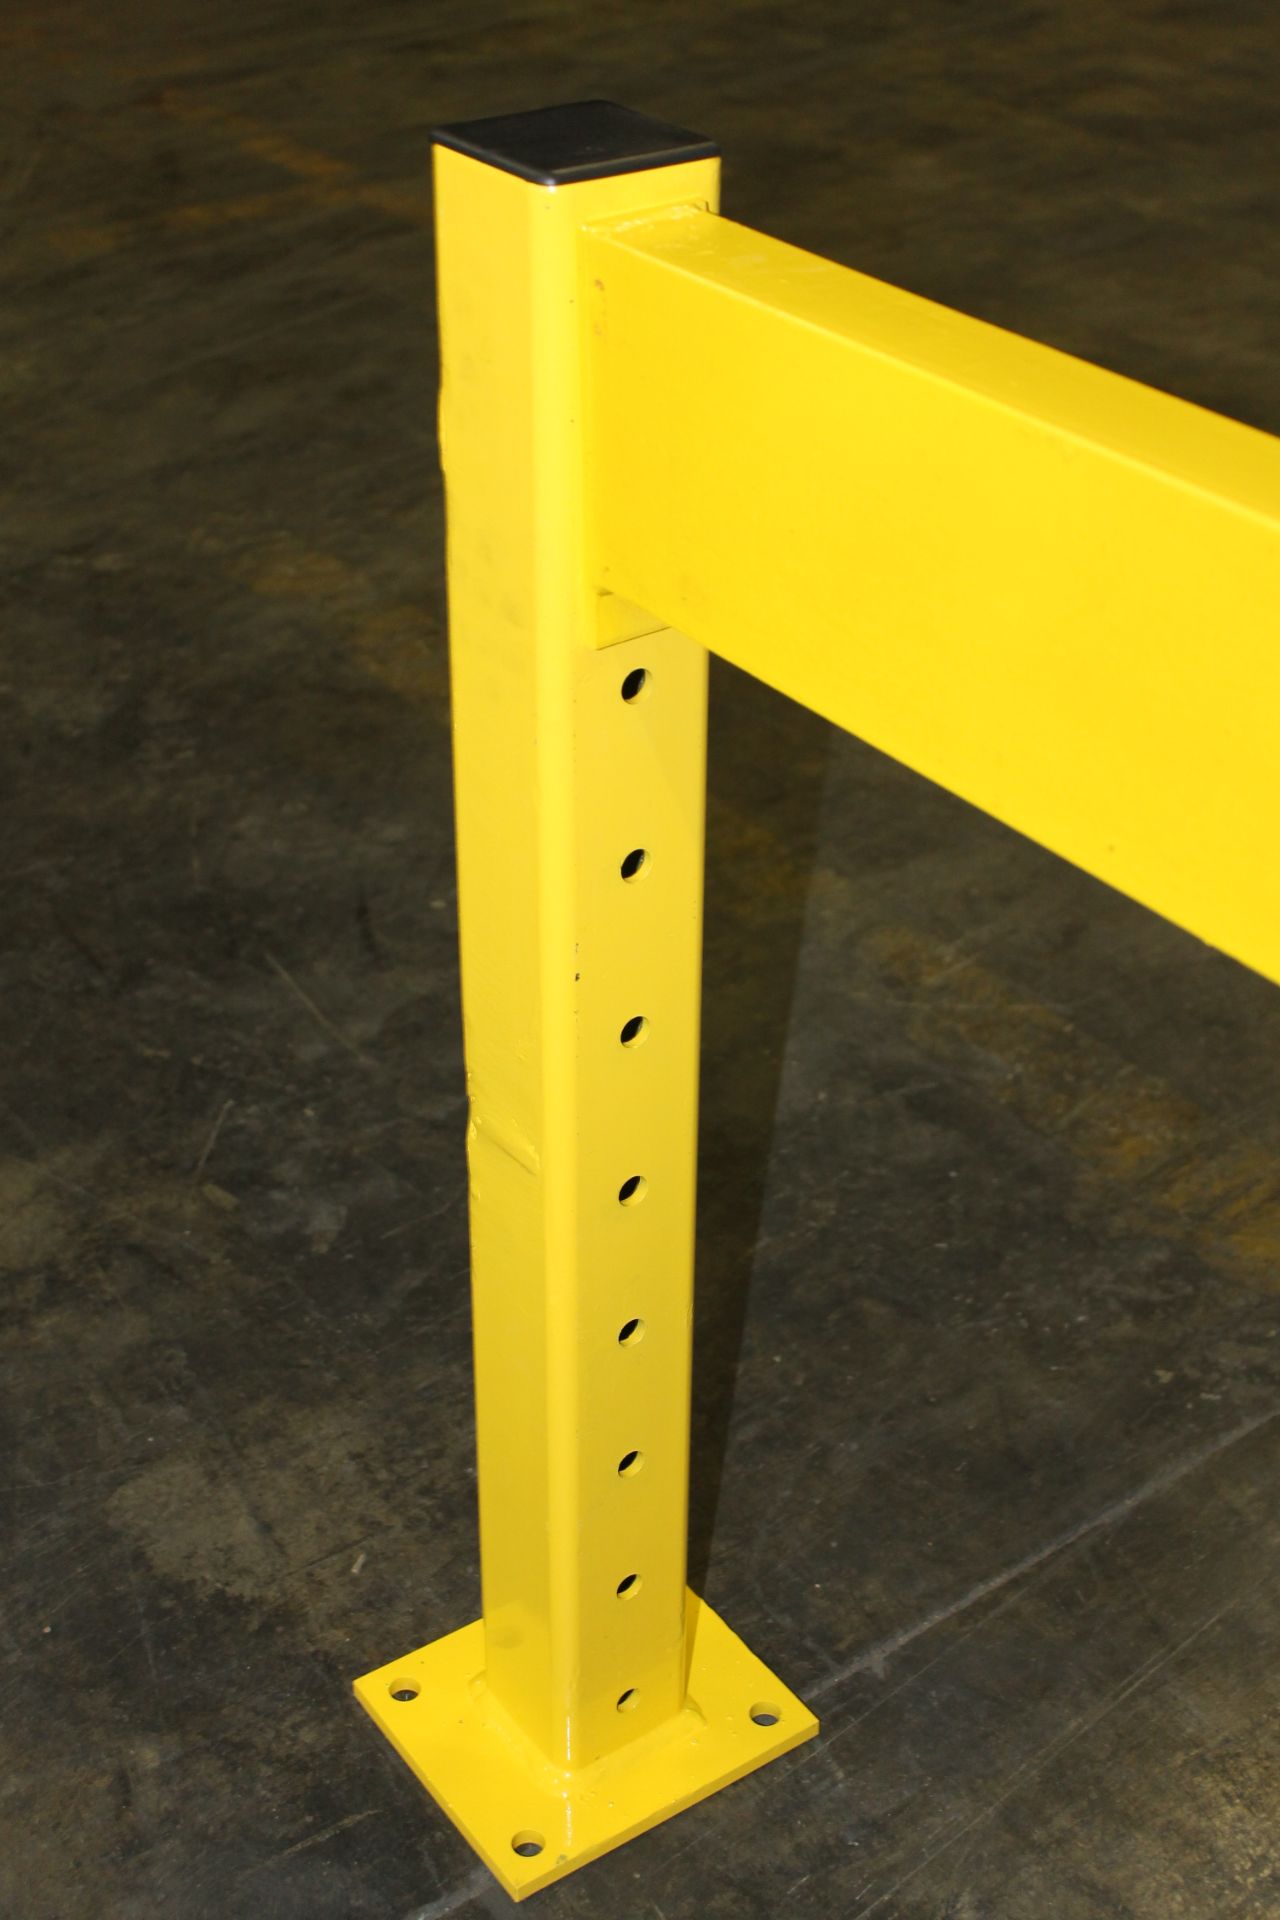 97.25 FT LONG AND 28" TALL GUARD RAIL,  OVERALL SIZE OF ONE SECTION: 100"W X 5"T X 2"D, INCLUDES: 13 - Image 3 of 4